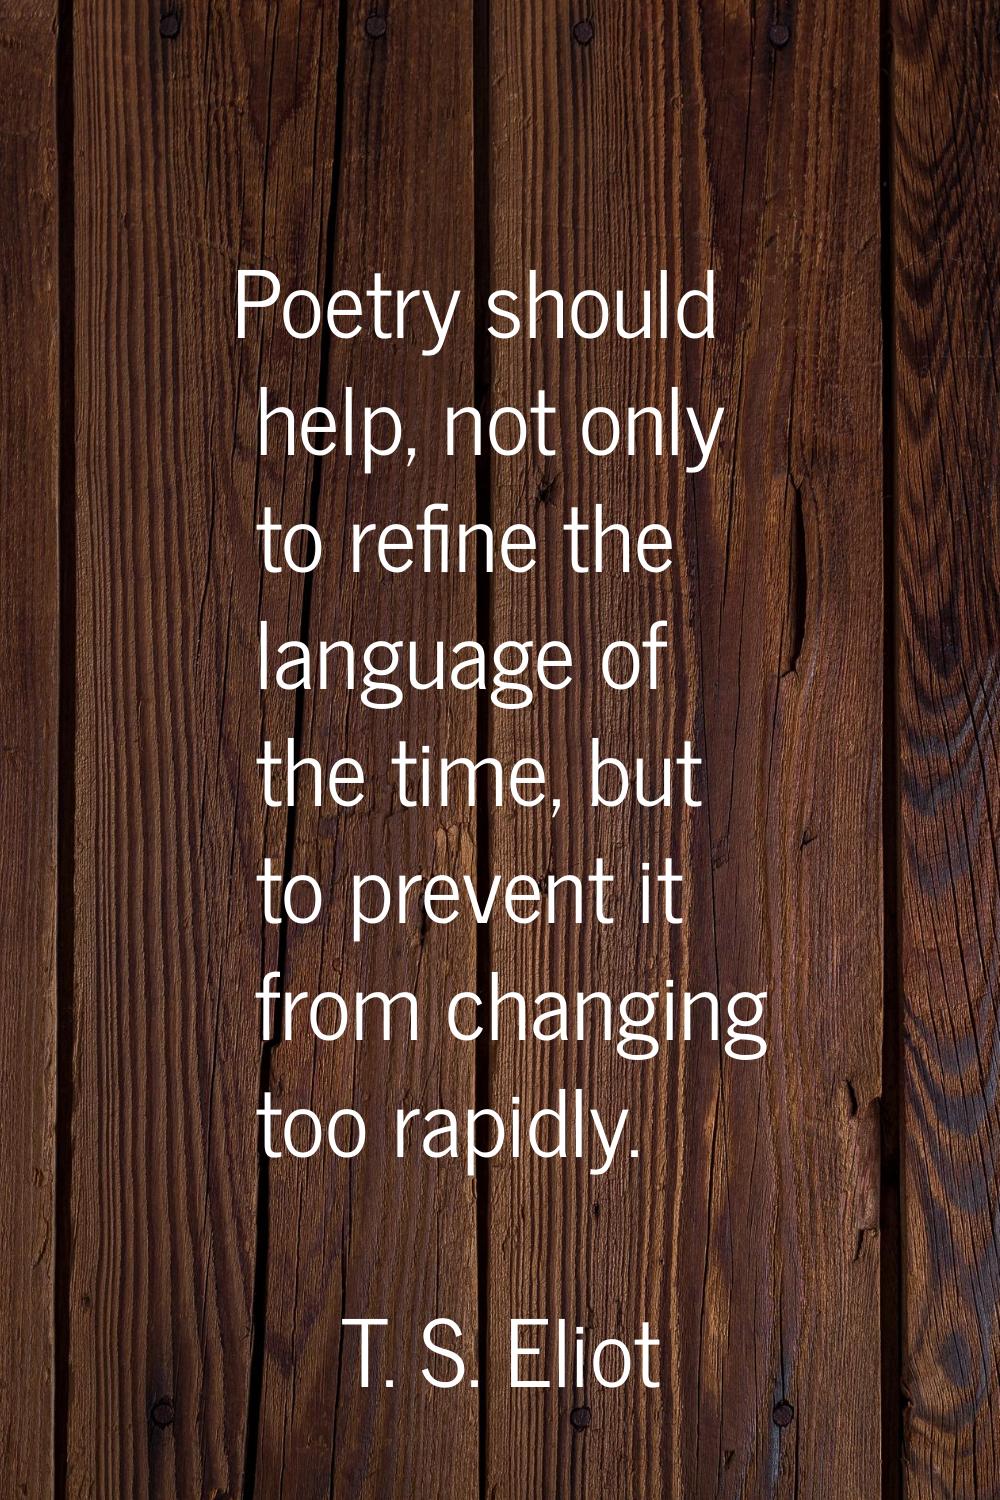 Poetry should help, not only to refine the language of the time, but to prevent it from changing to